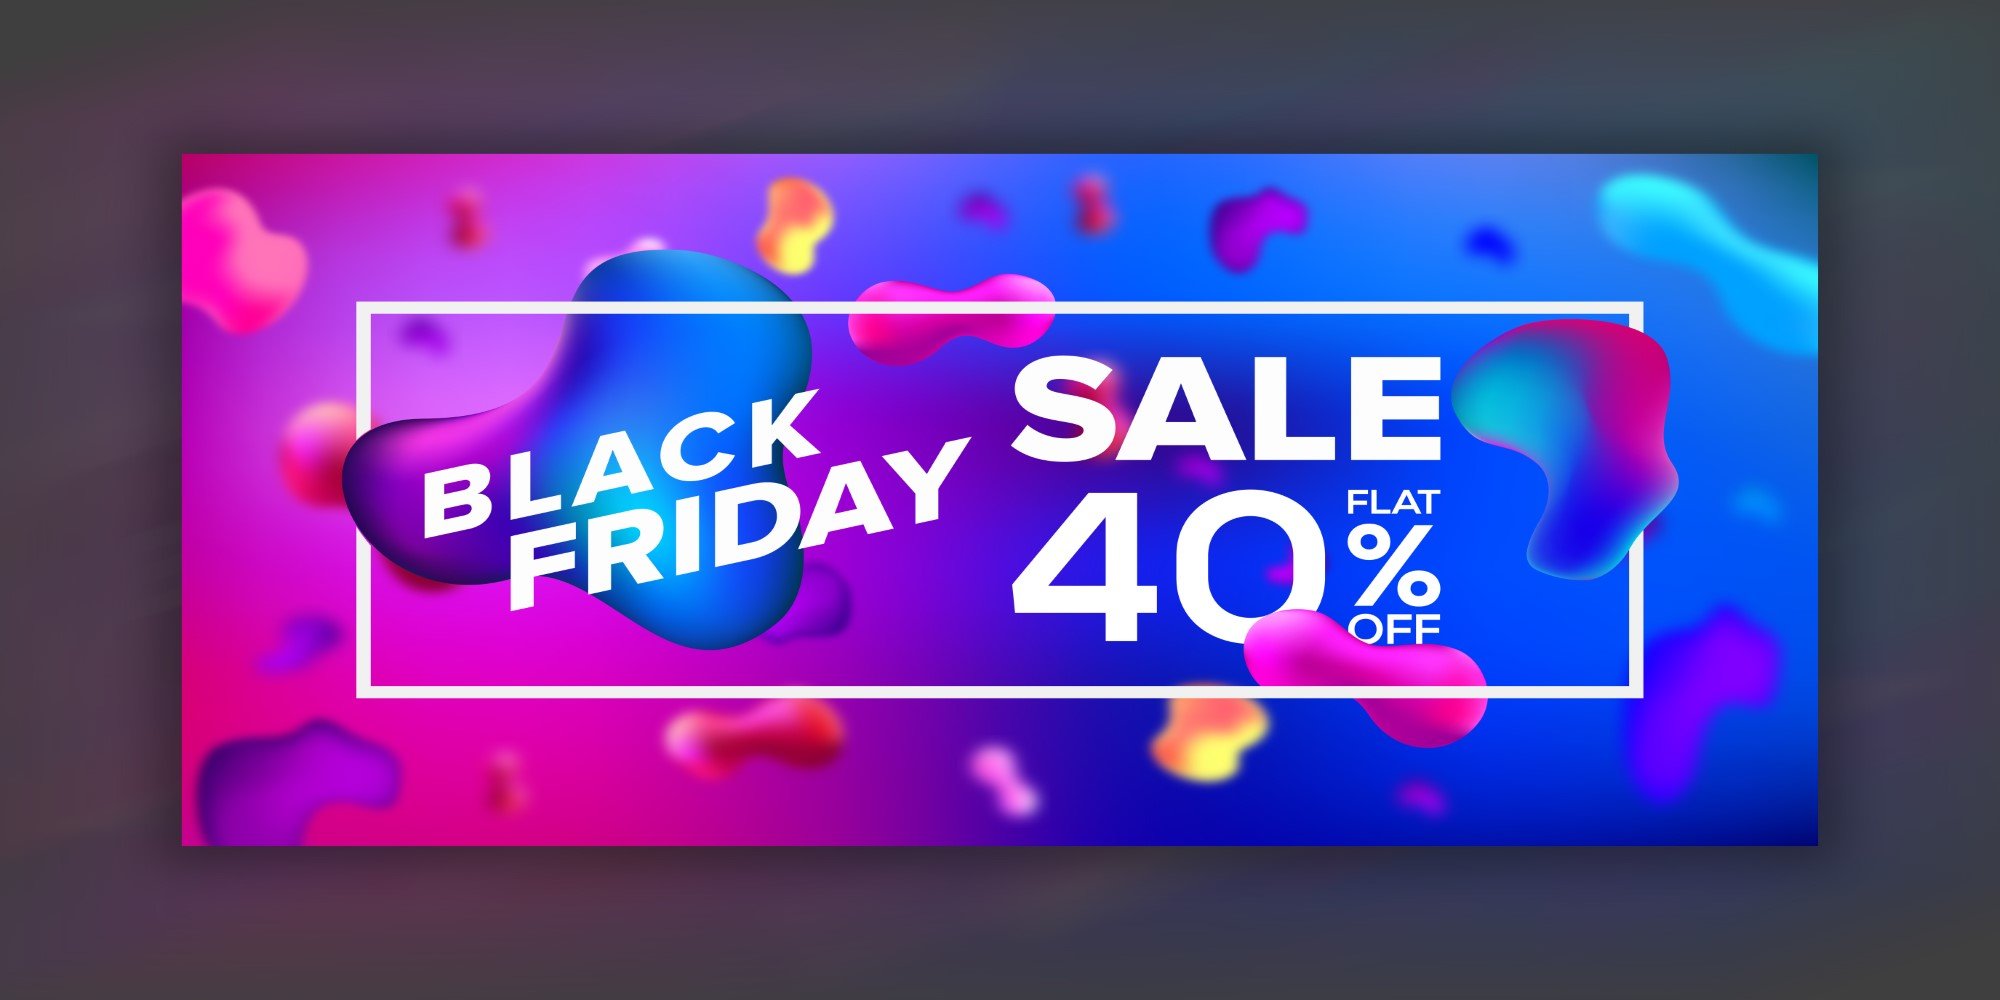 So creative and perceptible banner for Black Friday in a gradient and molecule shapes.